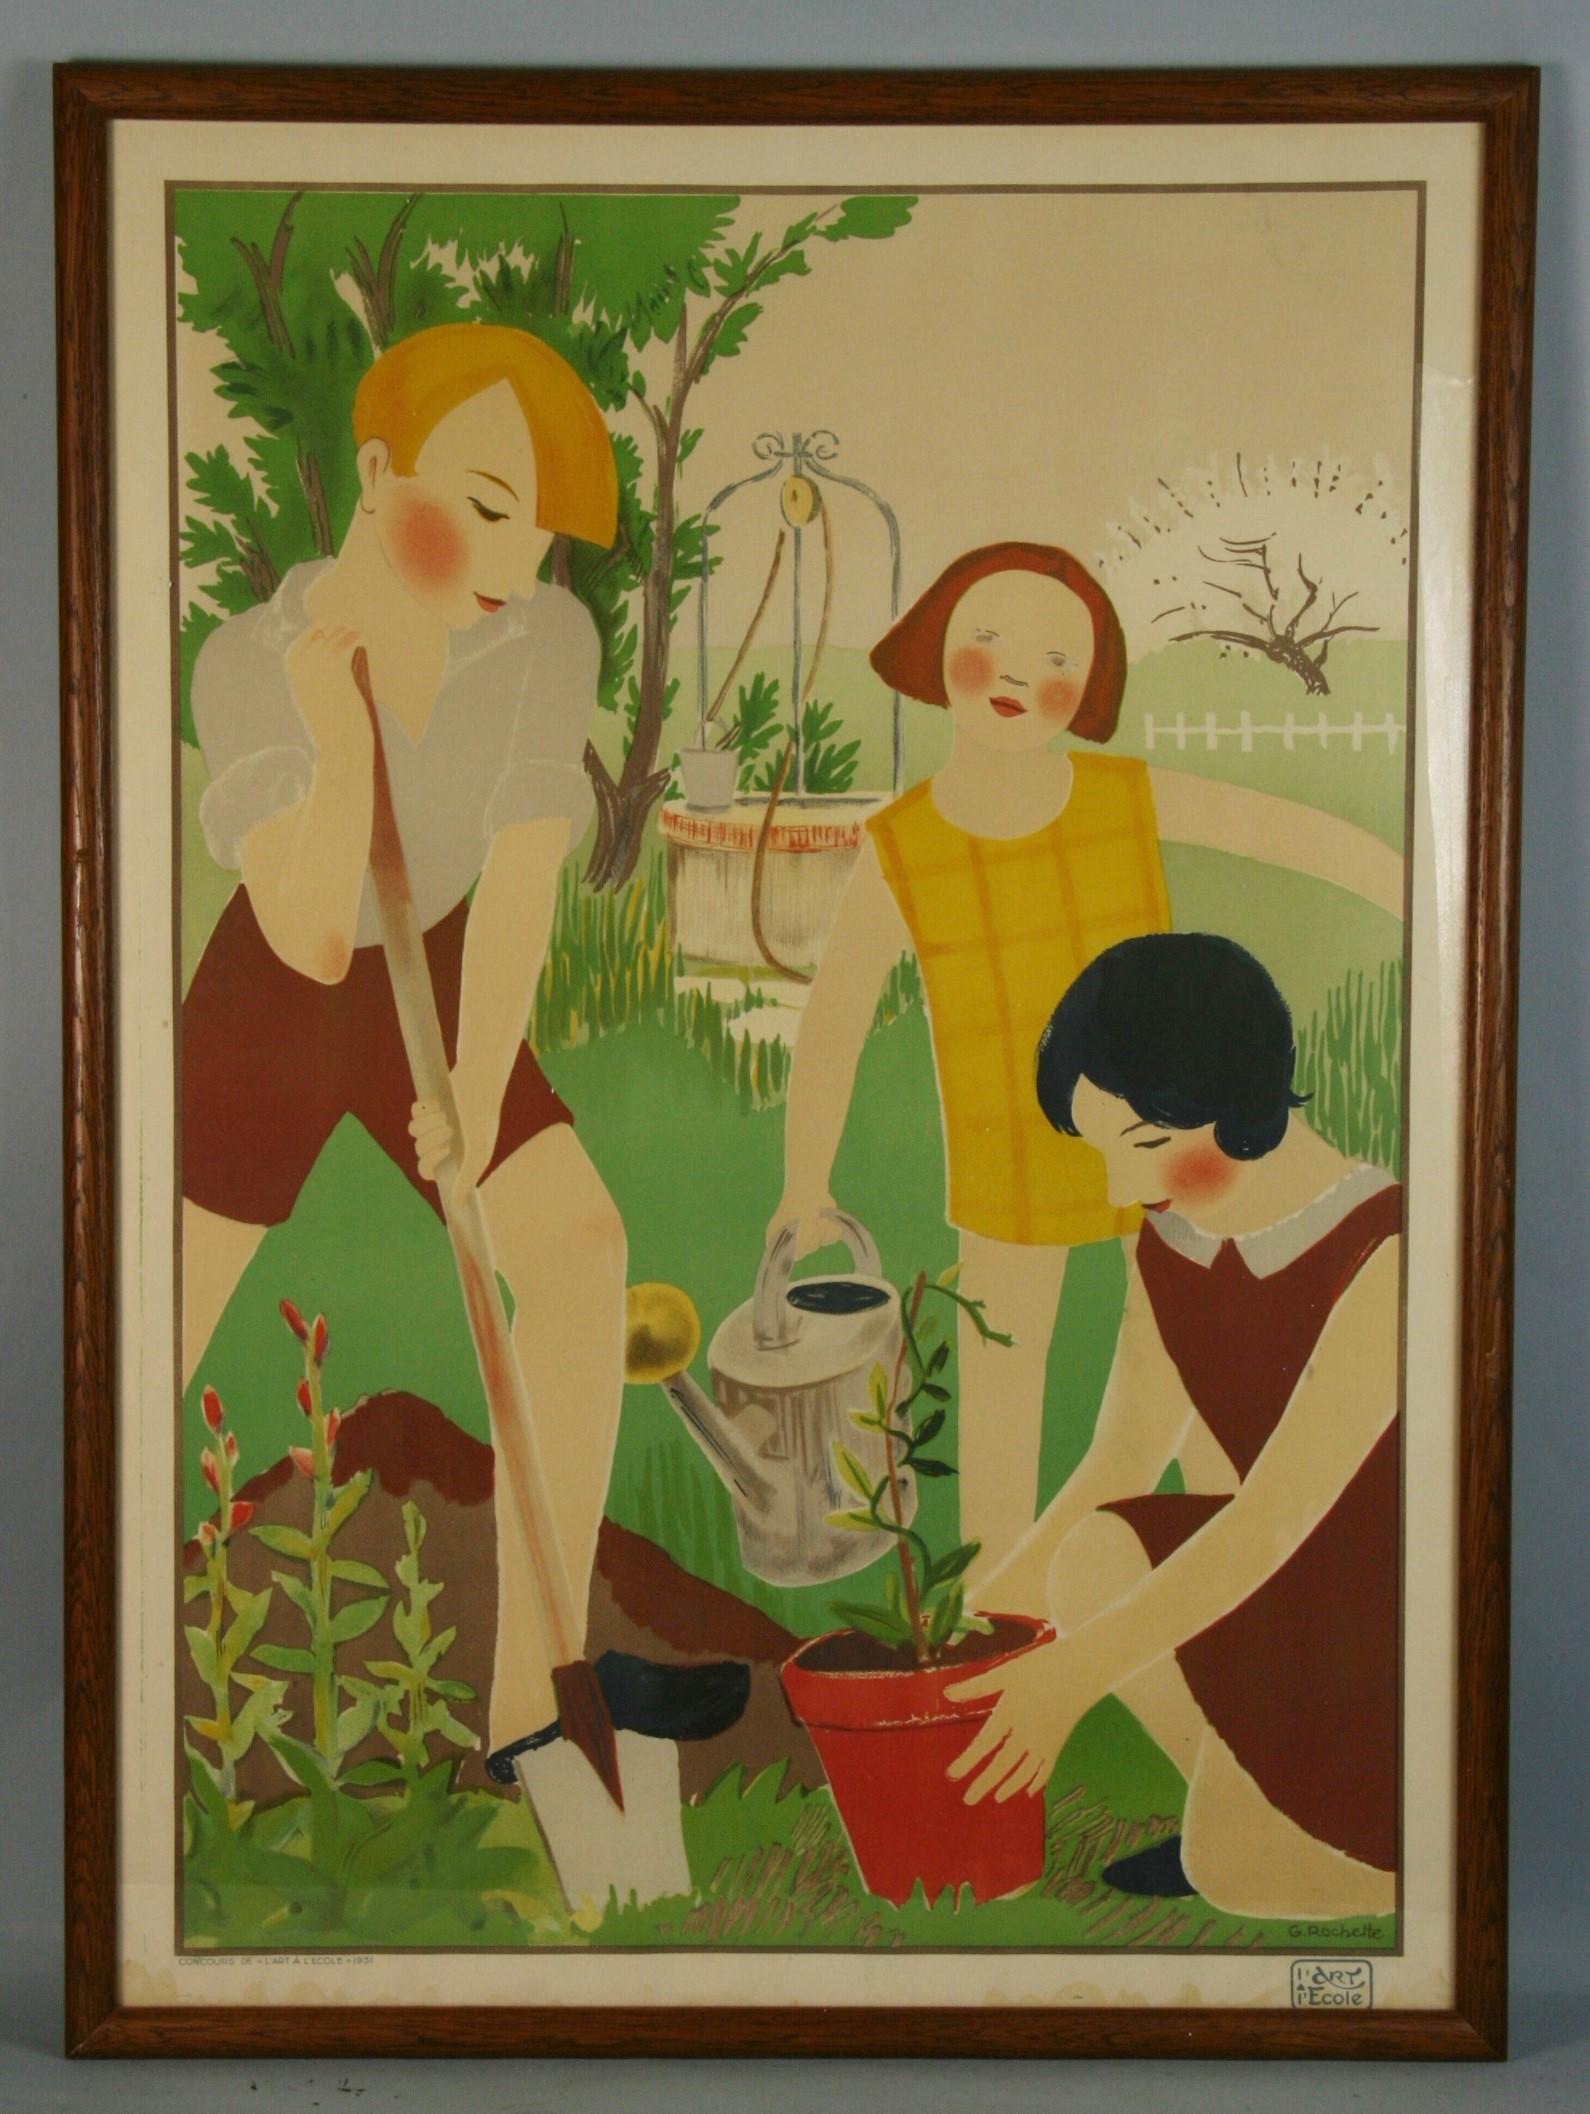 4005 large planting flowers deco style lithograph
Set in a wood frame under glass.